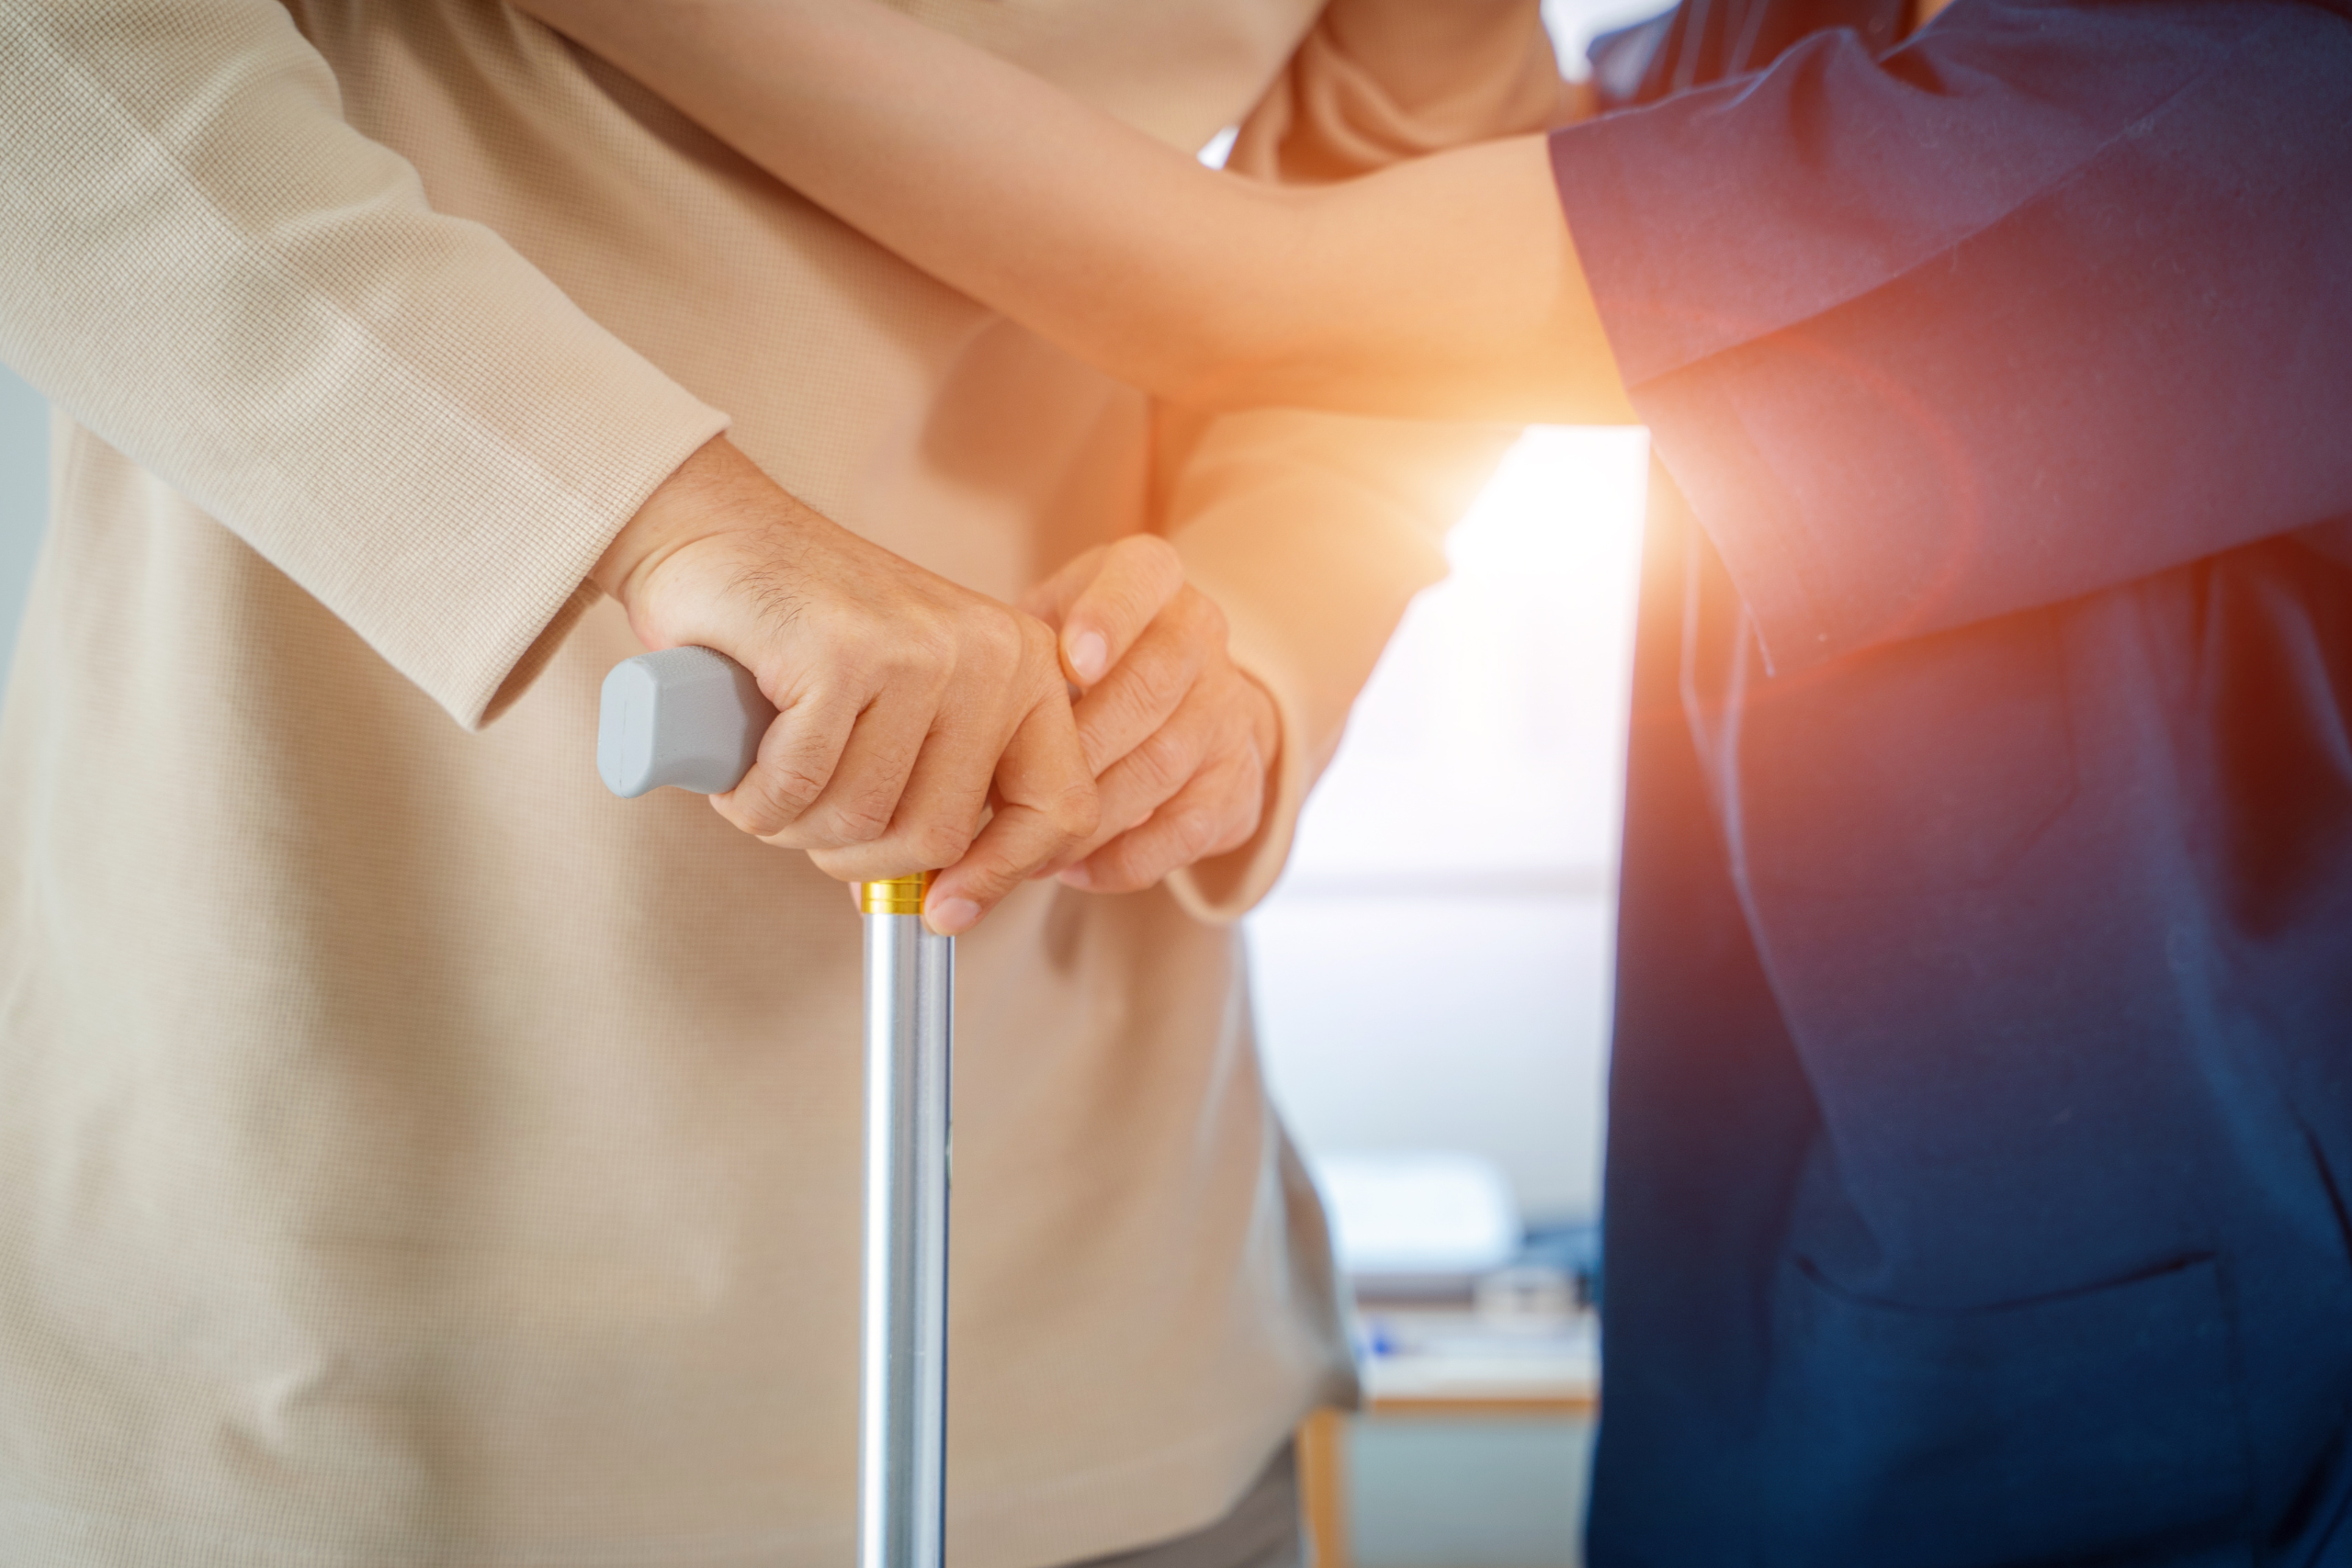 Close-up of a supportive caregiver's hands gently guiding an elderly person's hands on a walking cane, symbolizing the trust and care provided to seniors, relevant to articles on being knowledgeable and attentive to a loved one's needs.